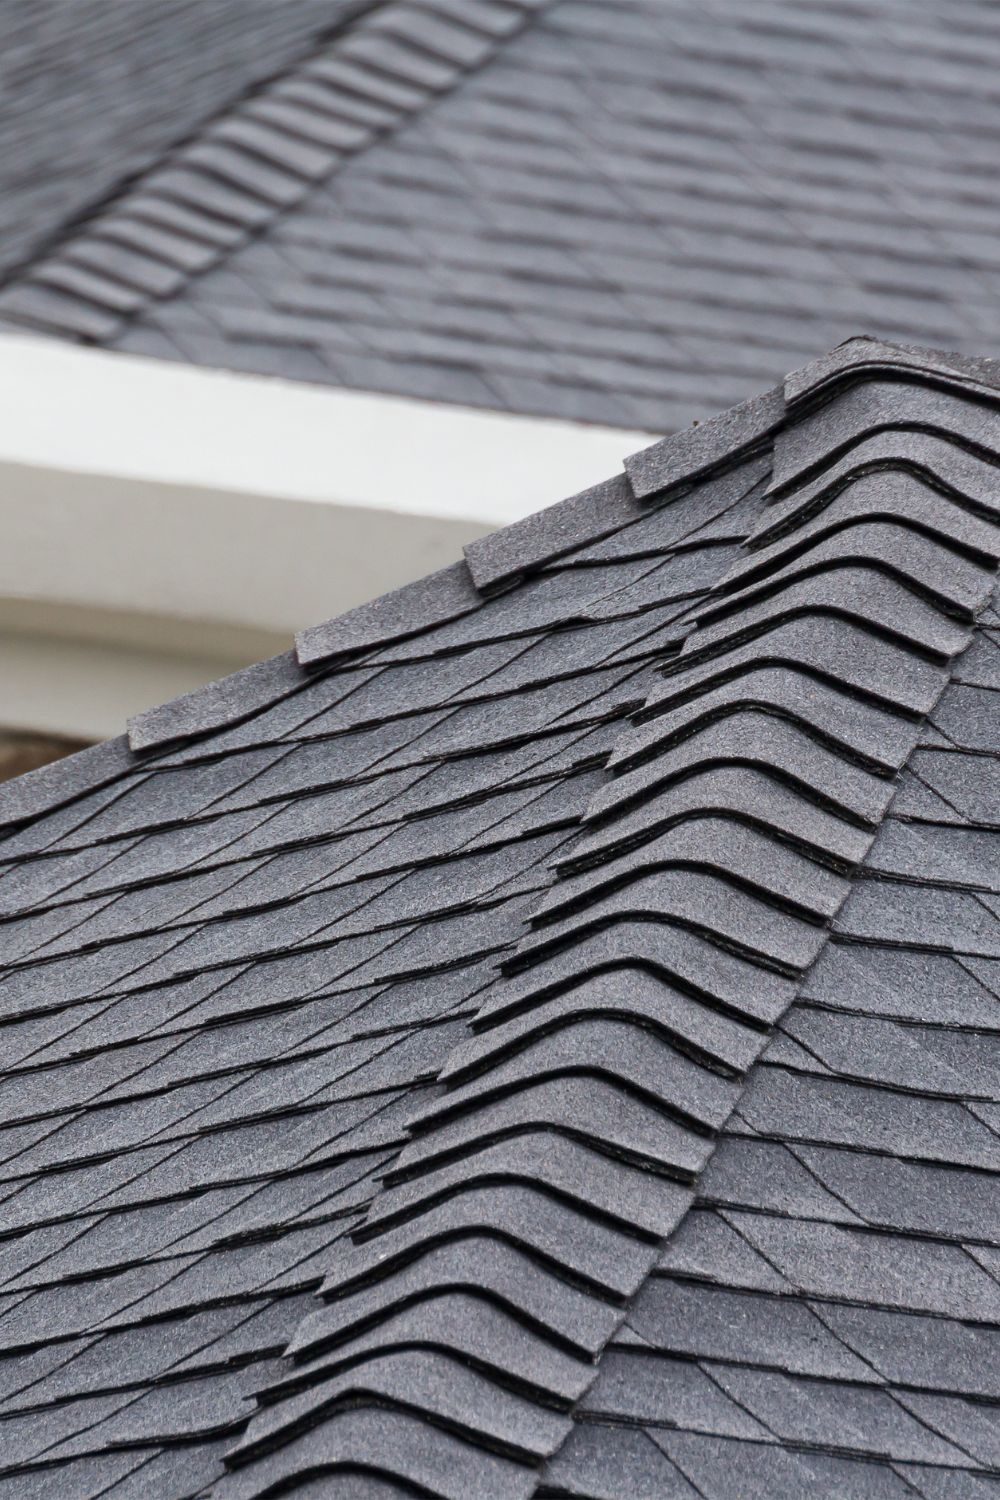 Understanding the Value of Preventive Roof Care